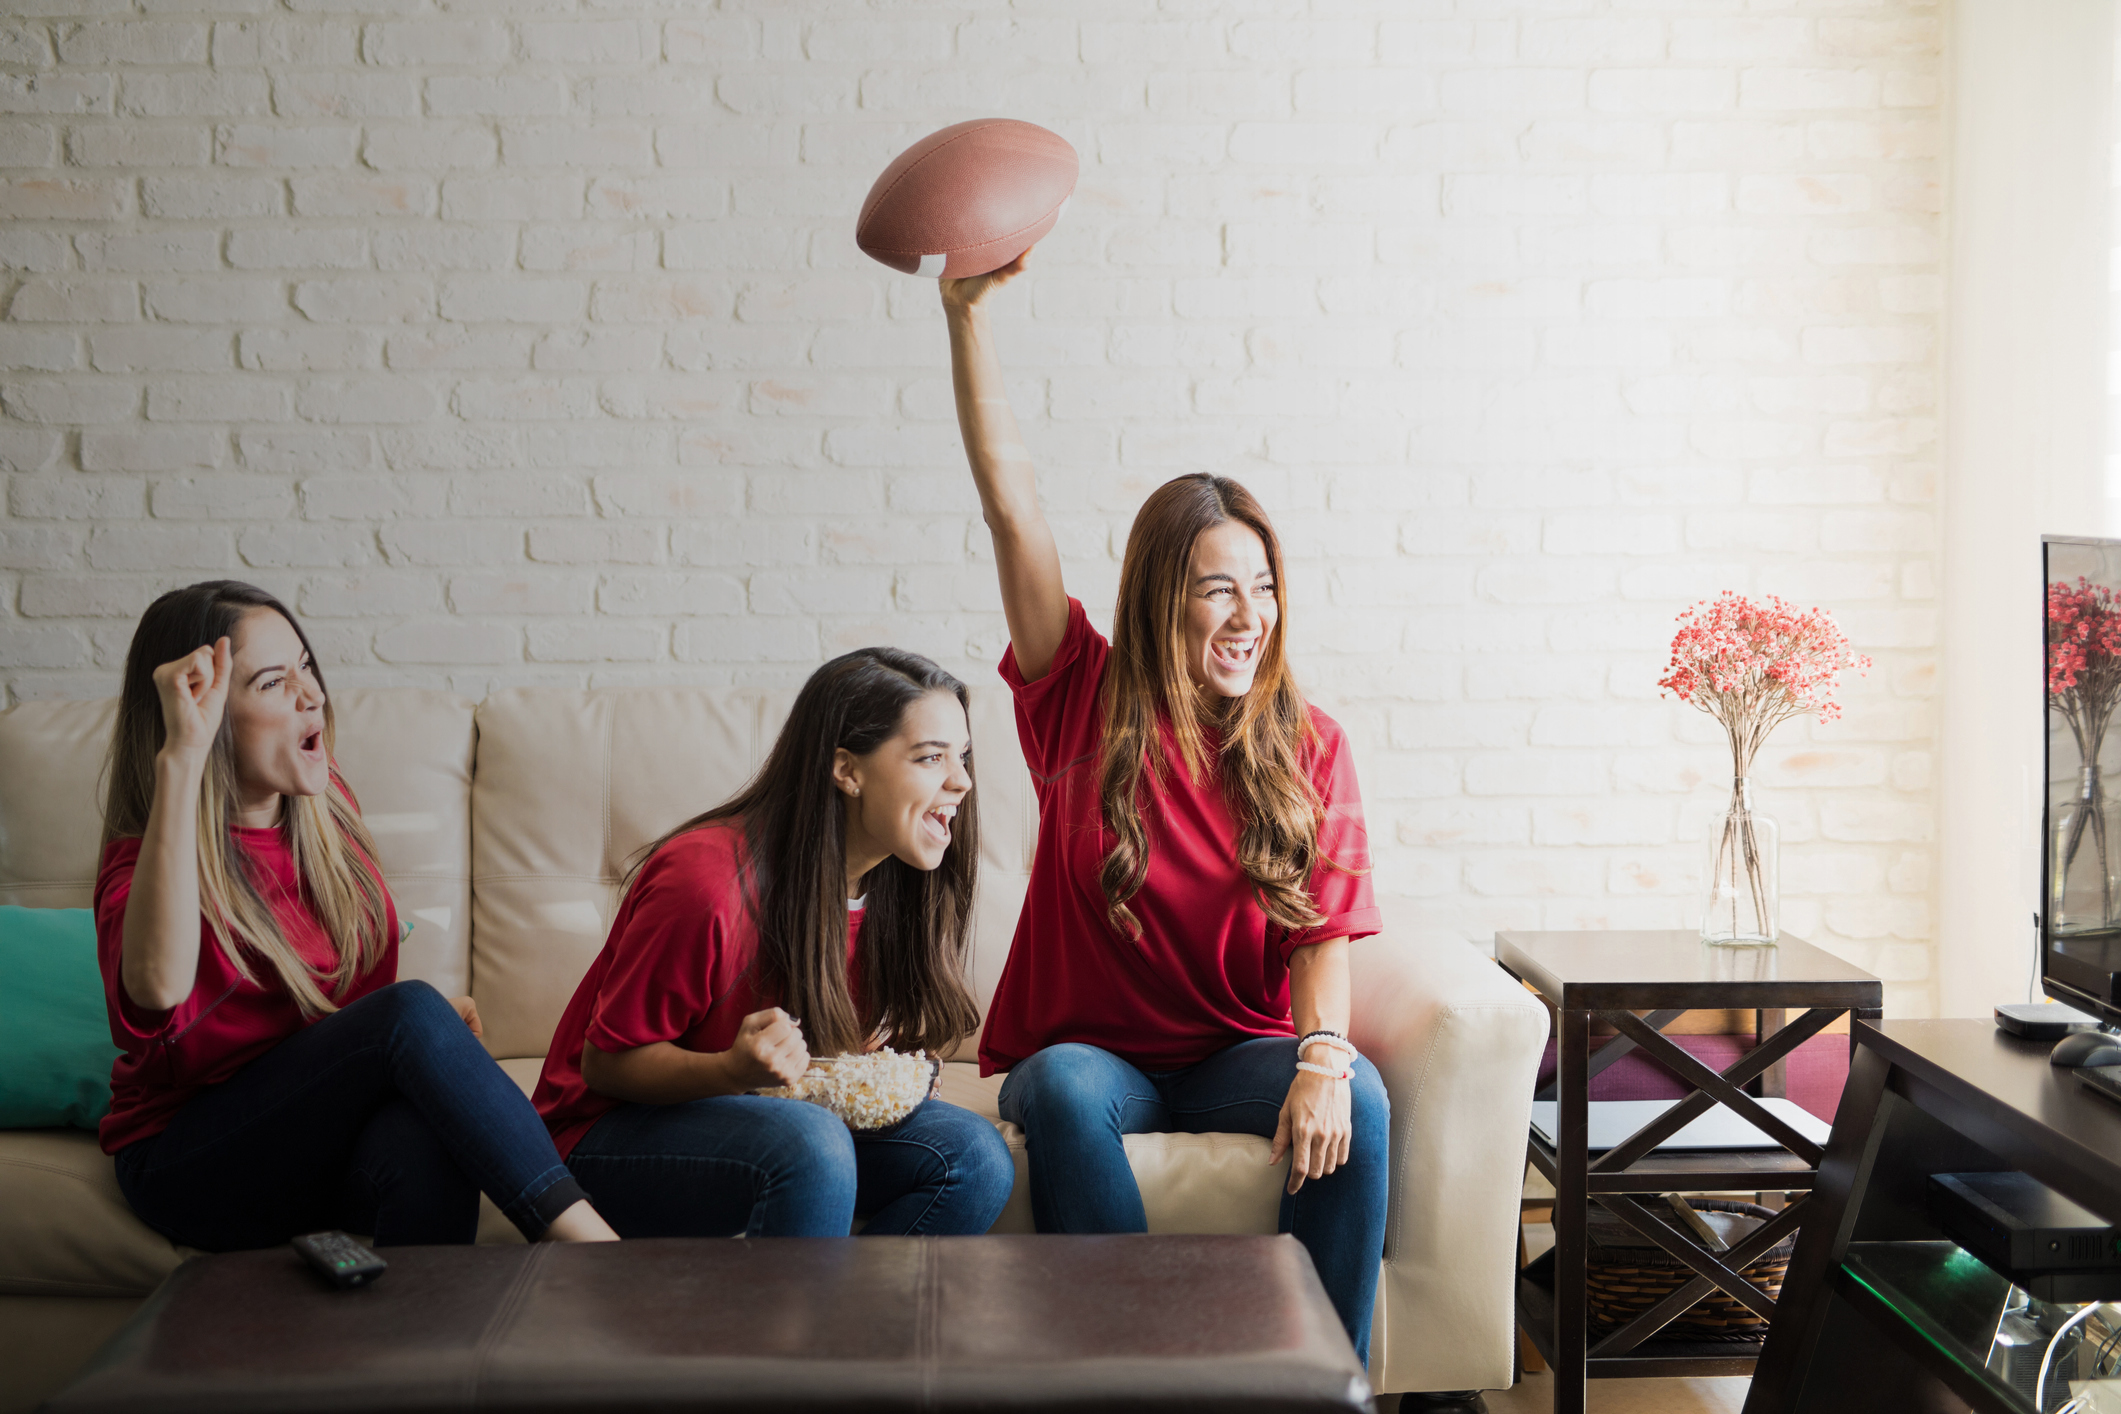 Three roomies wearing team jerseys and watching a football team on tv, celebrating a touchdown